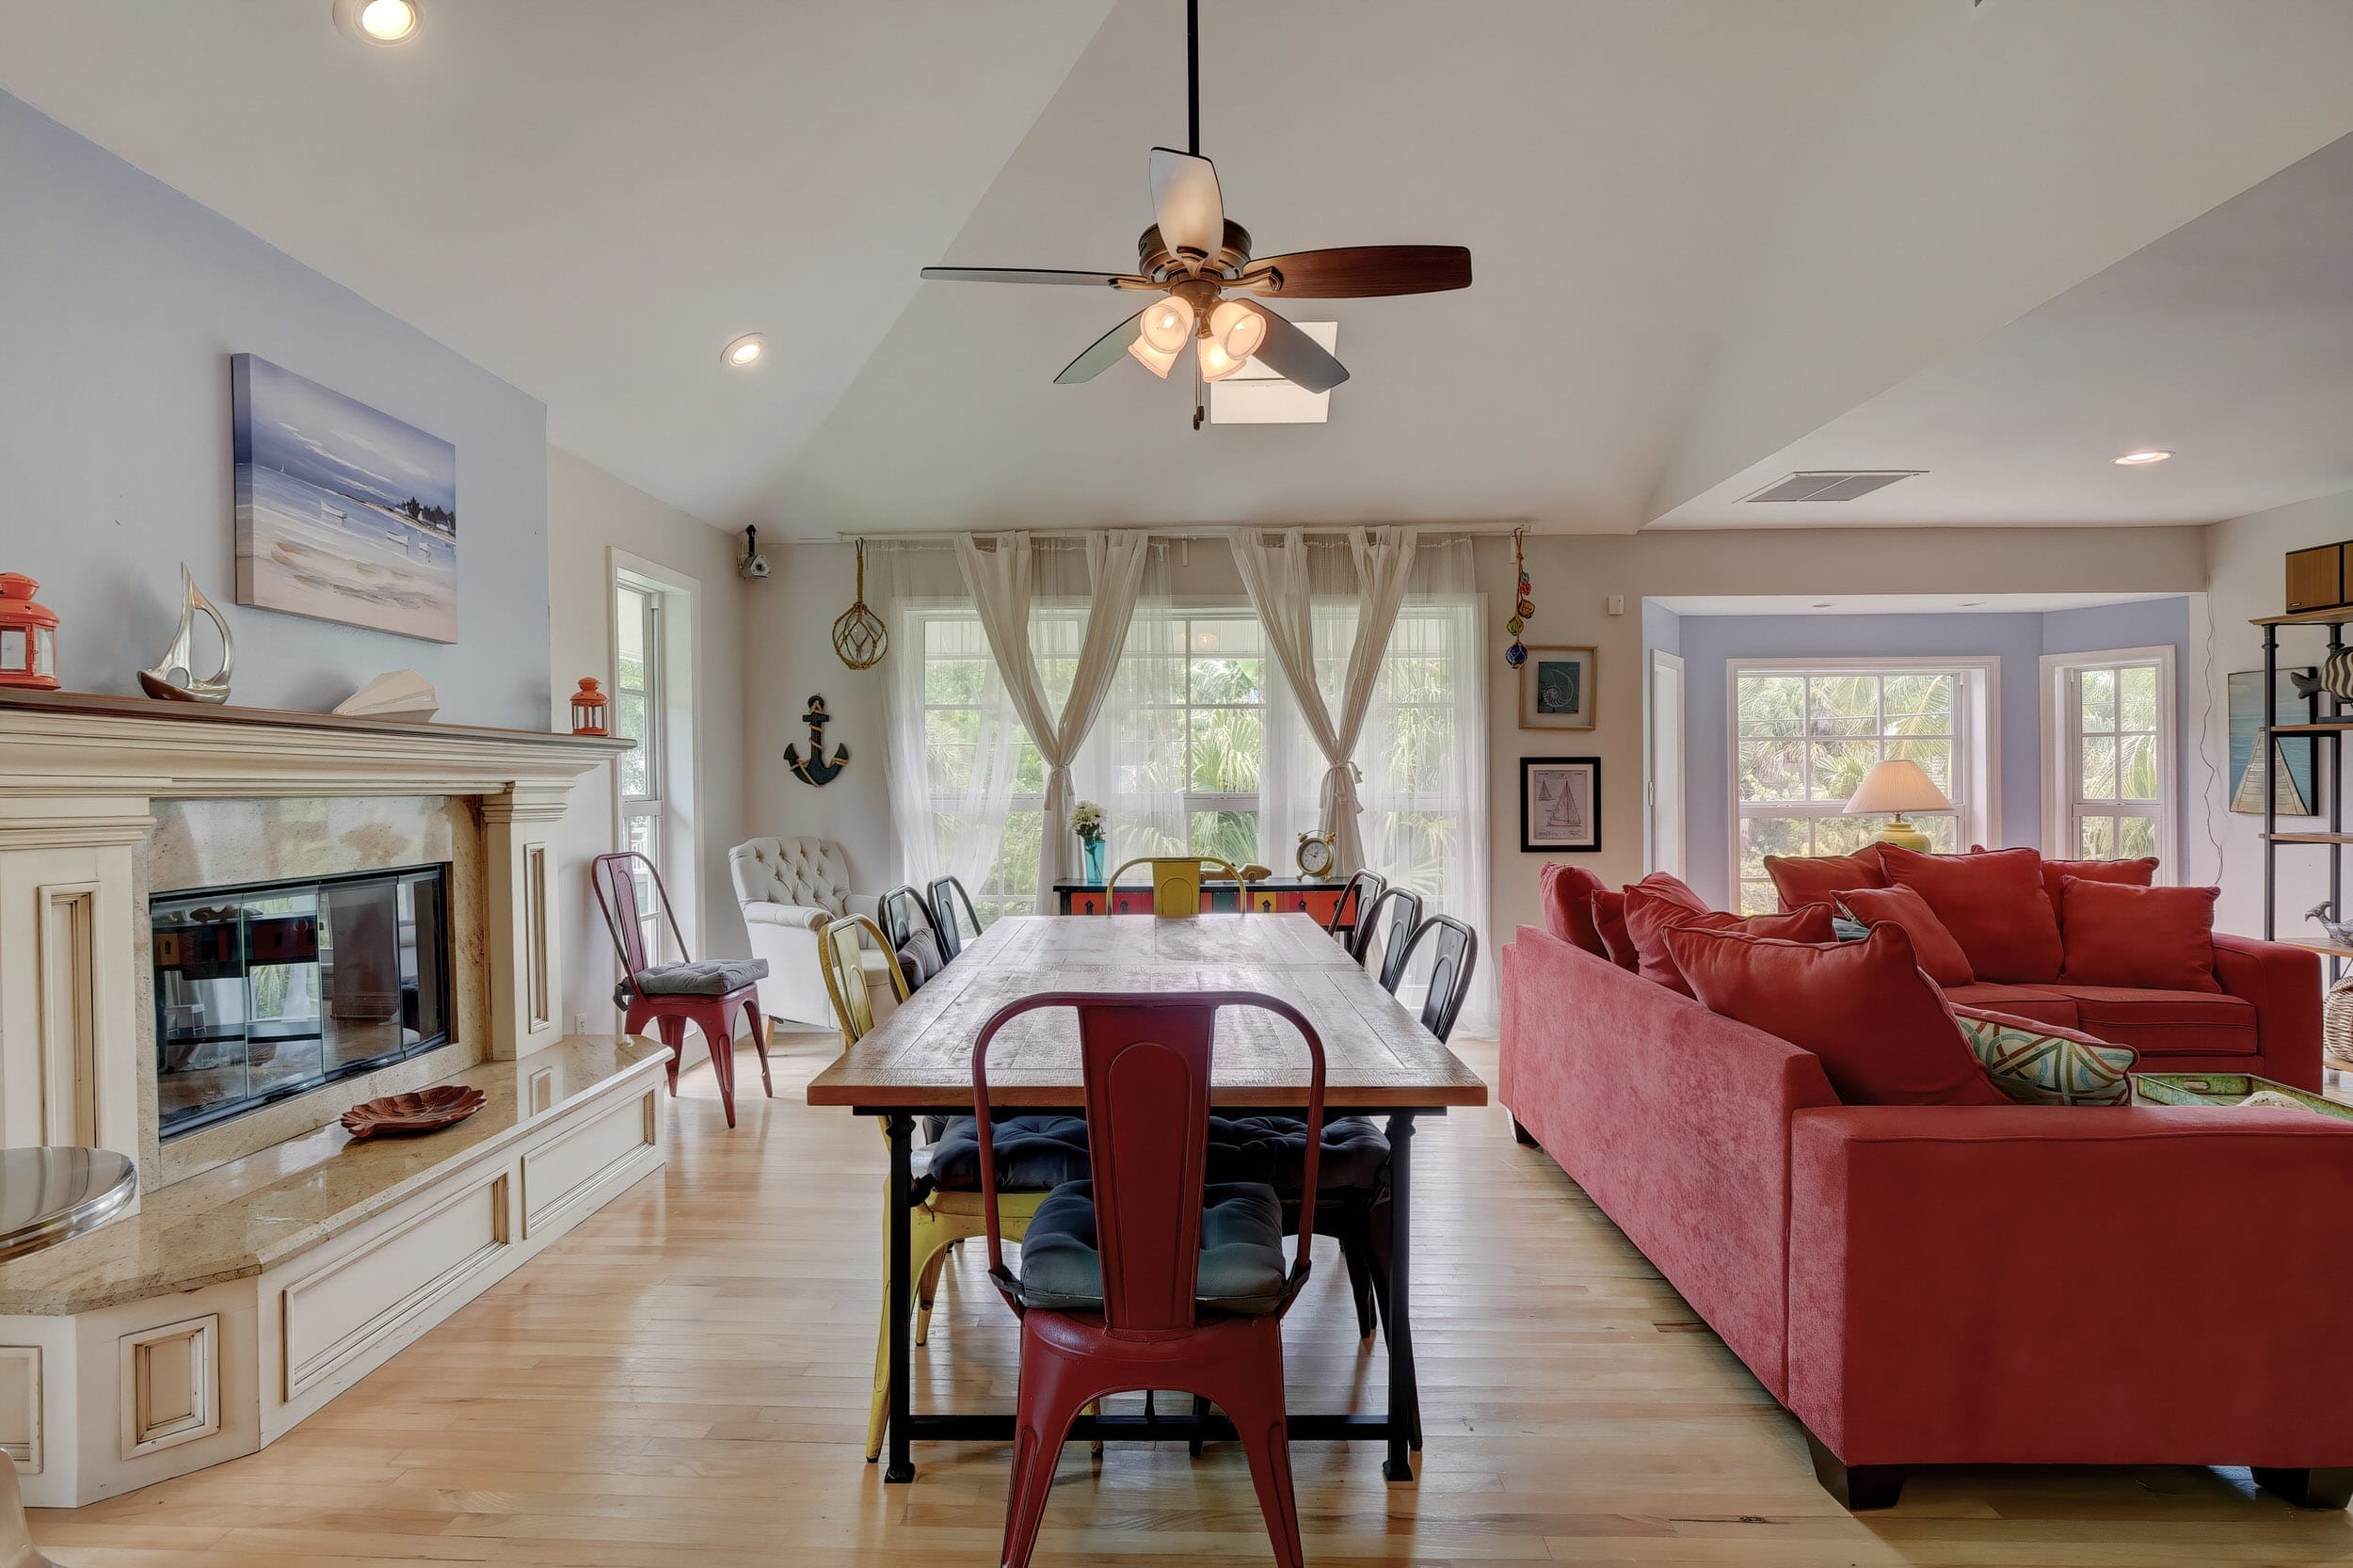 The Open Floor Plan in the Home Is Built For the Modern Family and Traveler